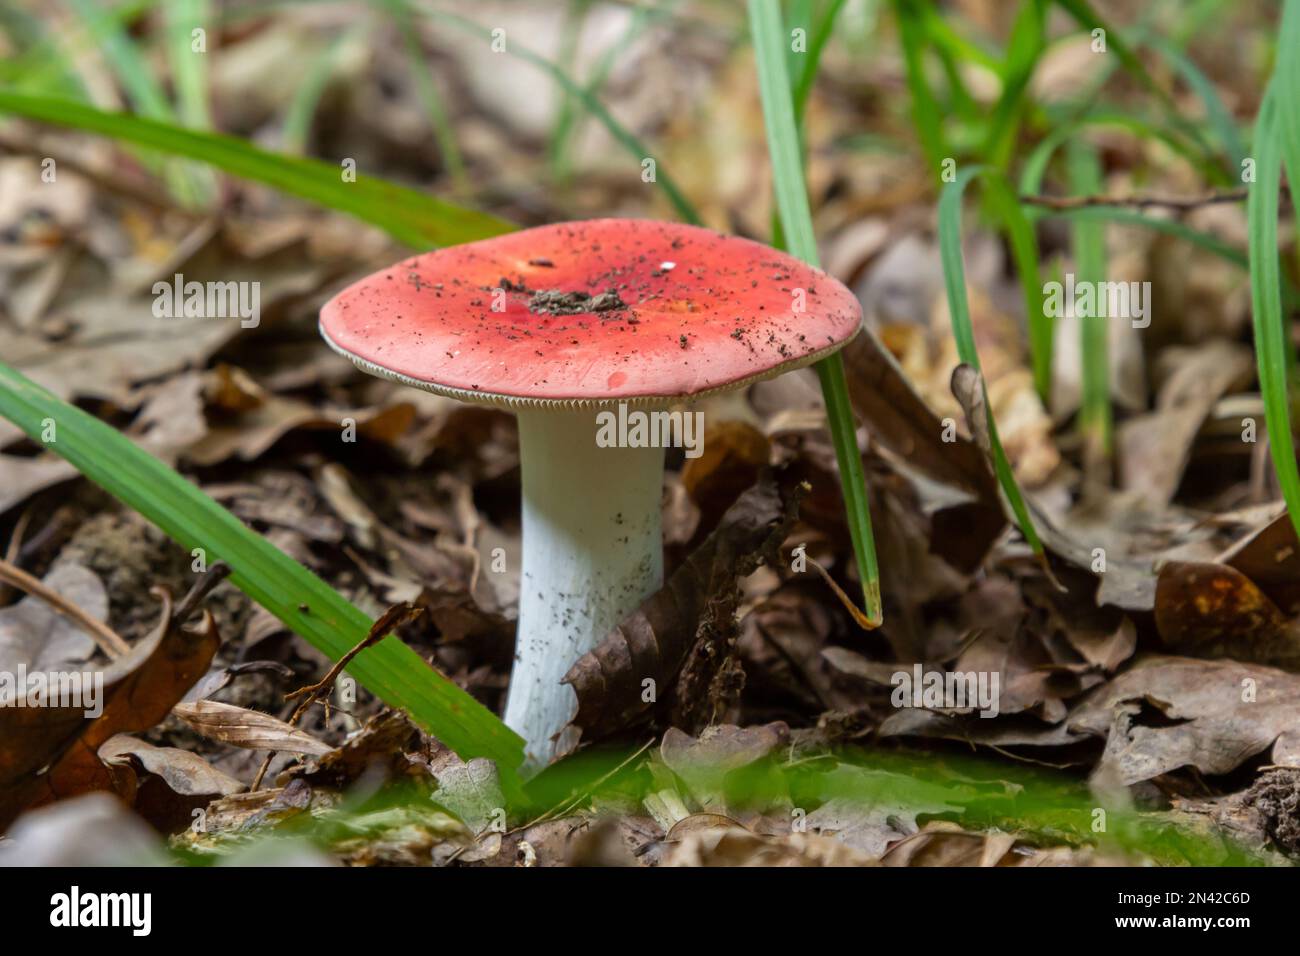 Russula emetica, commonly known as the sickener, emetic russula, or vomiting russula, is a basidiomycete mushroom. Stock Photo